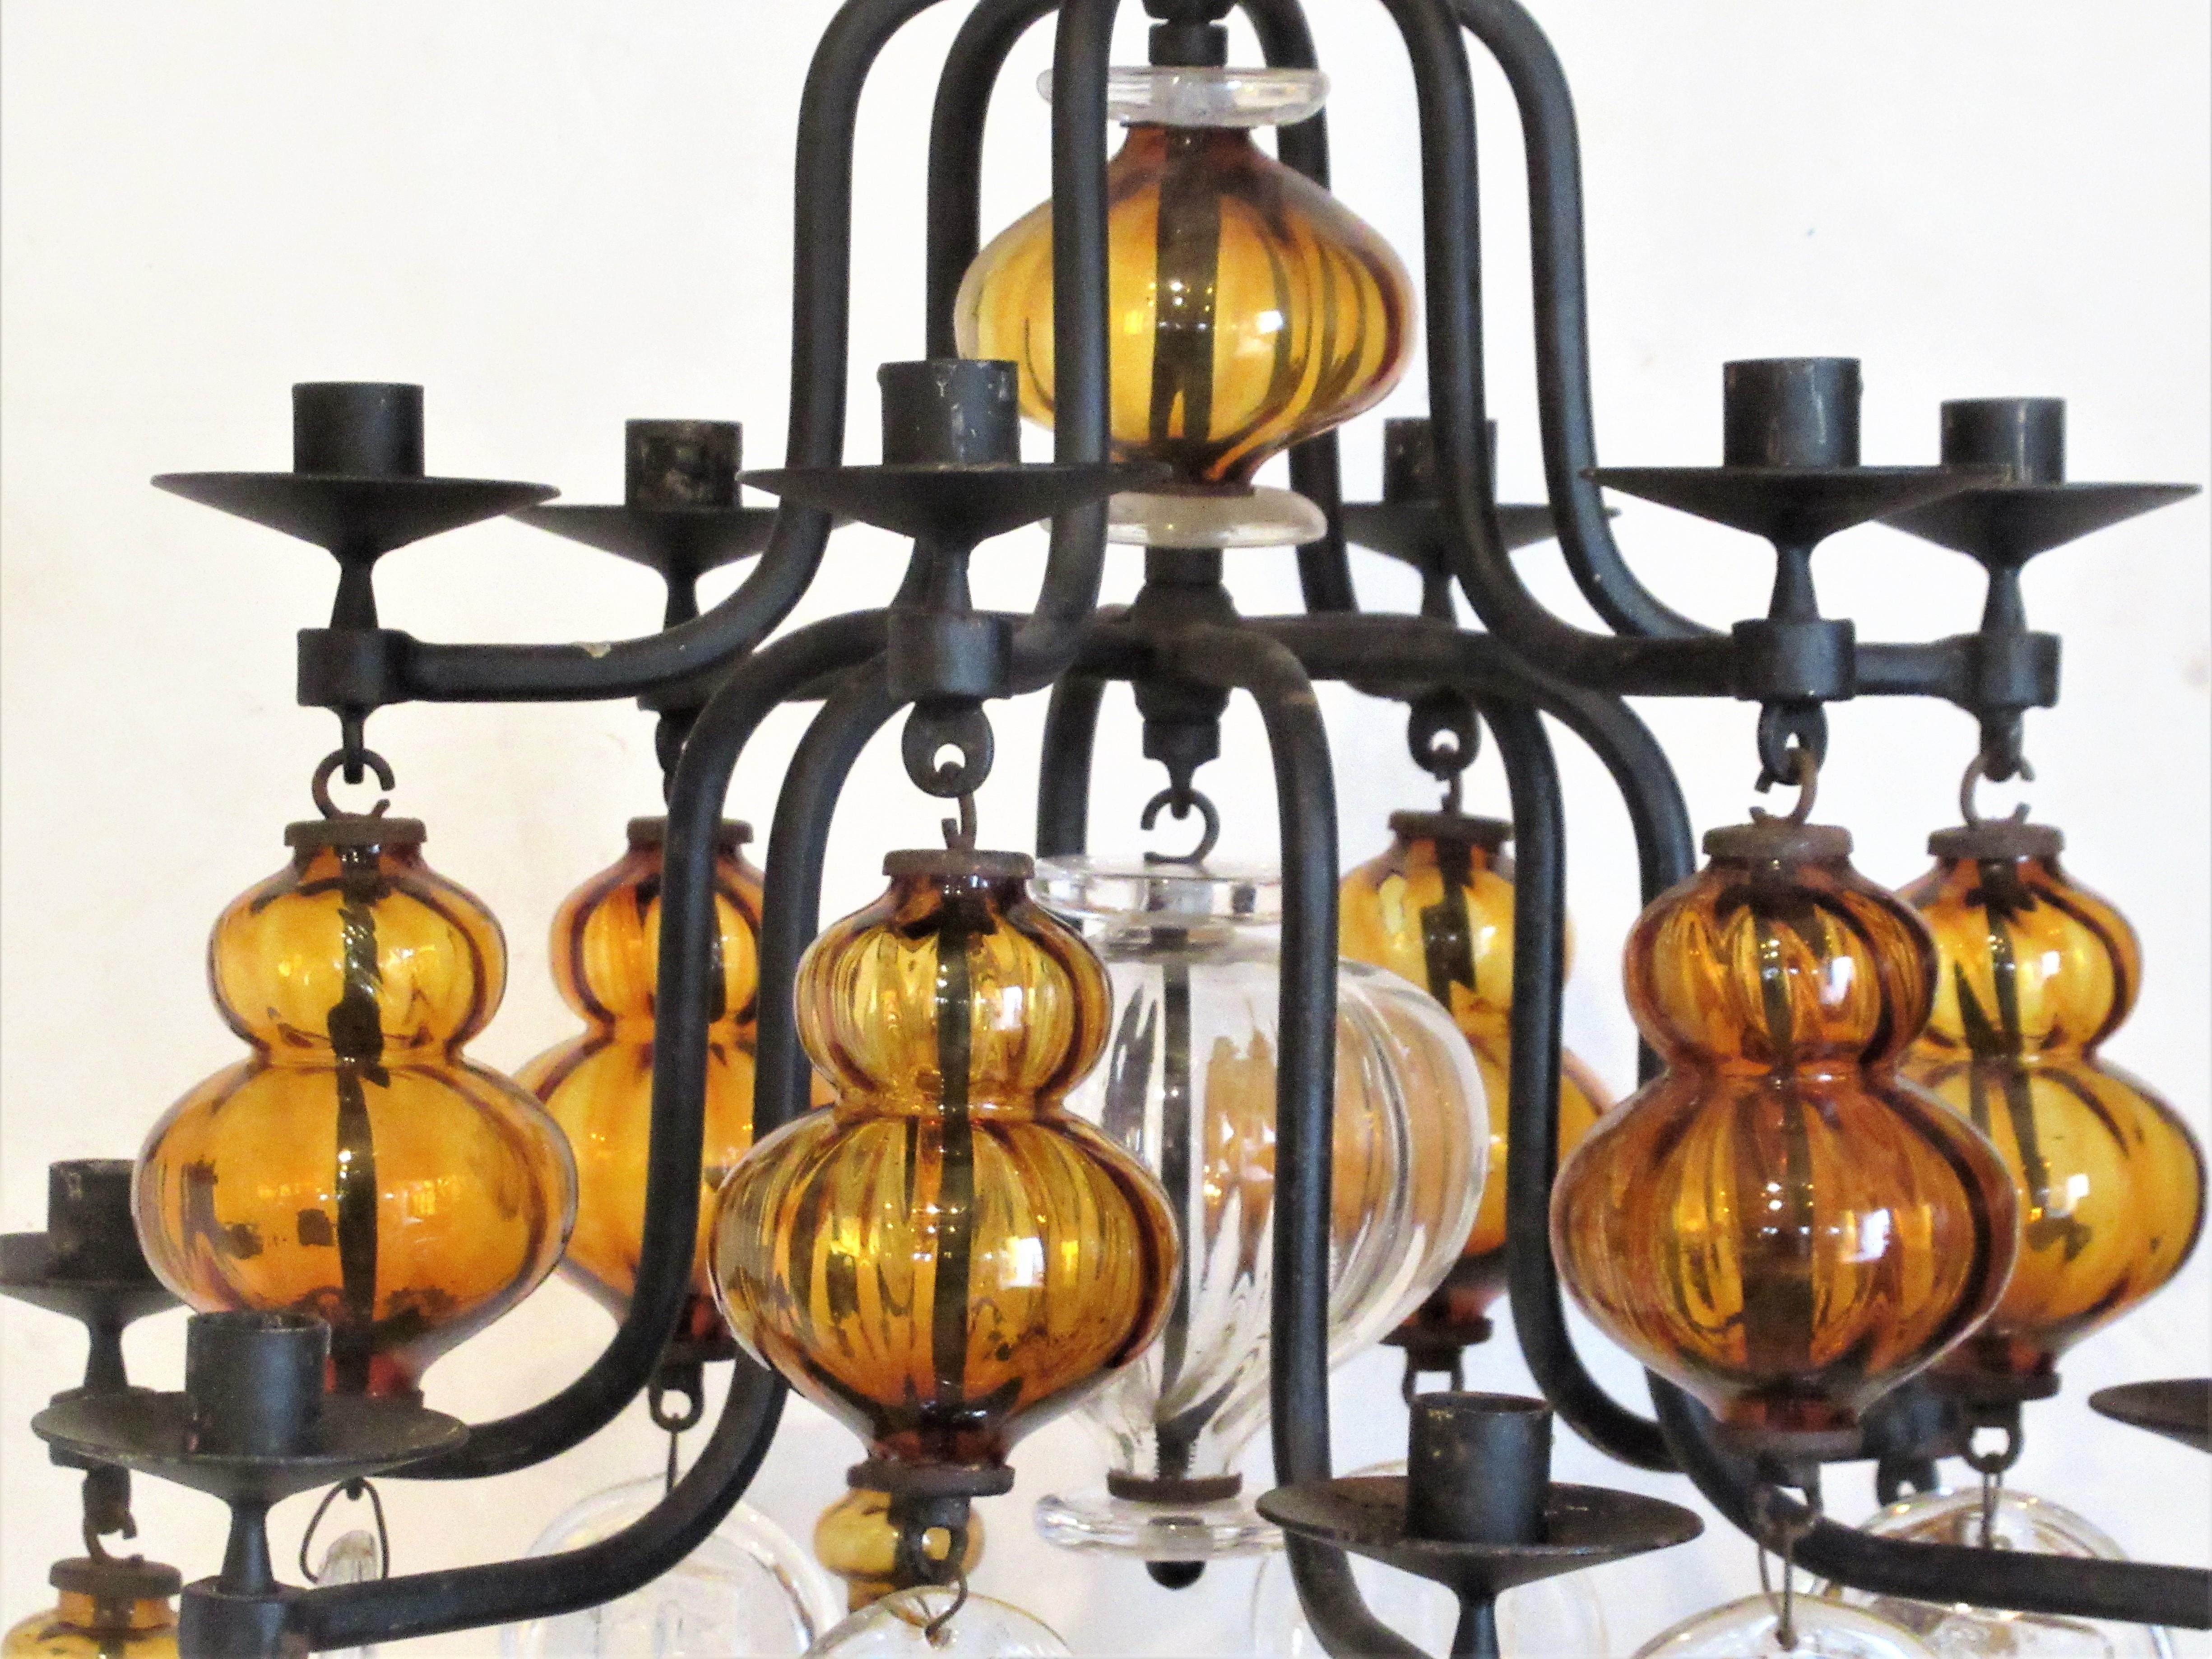 Large hand wrought iron twelve candle armature chandelier with both amber / clear glass elements and solid clear glass pendants showing images of fish and faces by Erik Hoglund for Boda Glassworks, Sweden - circa 1950's. Chandelier measures 36